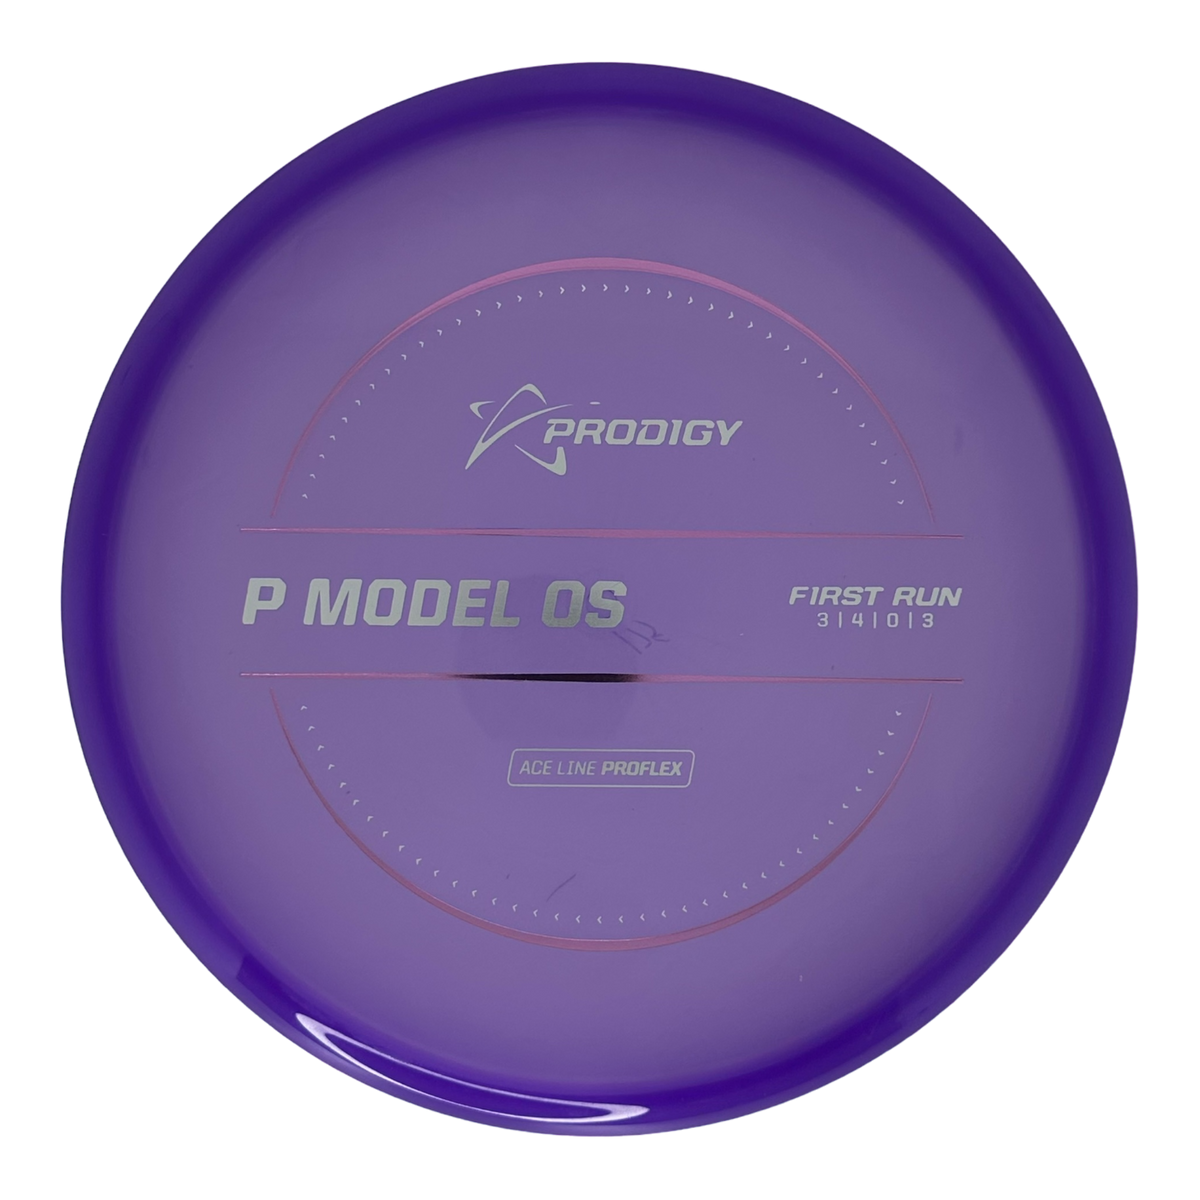 Prodigy Pre-Owned Putters